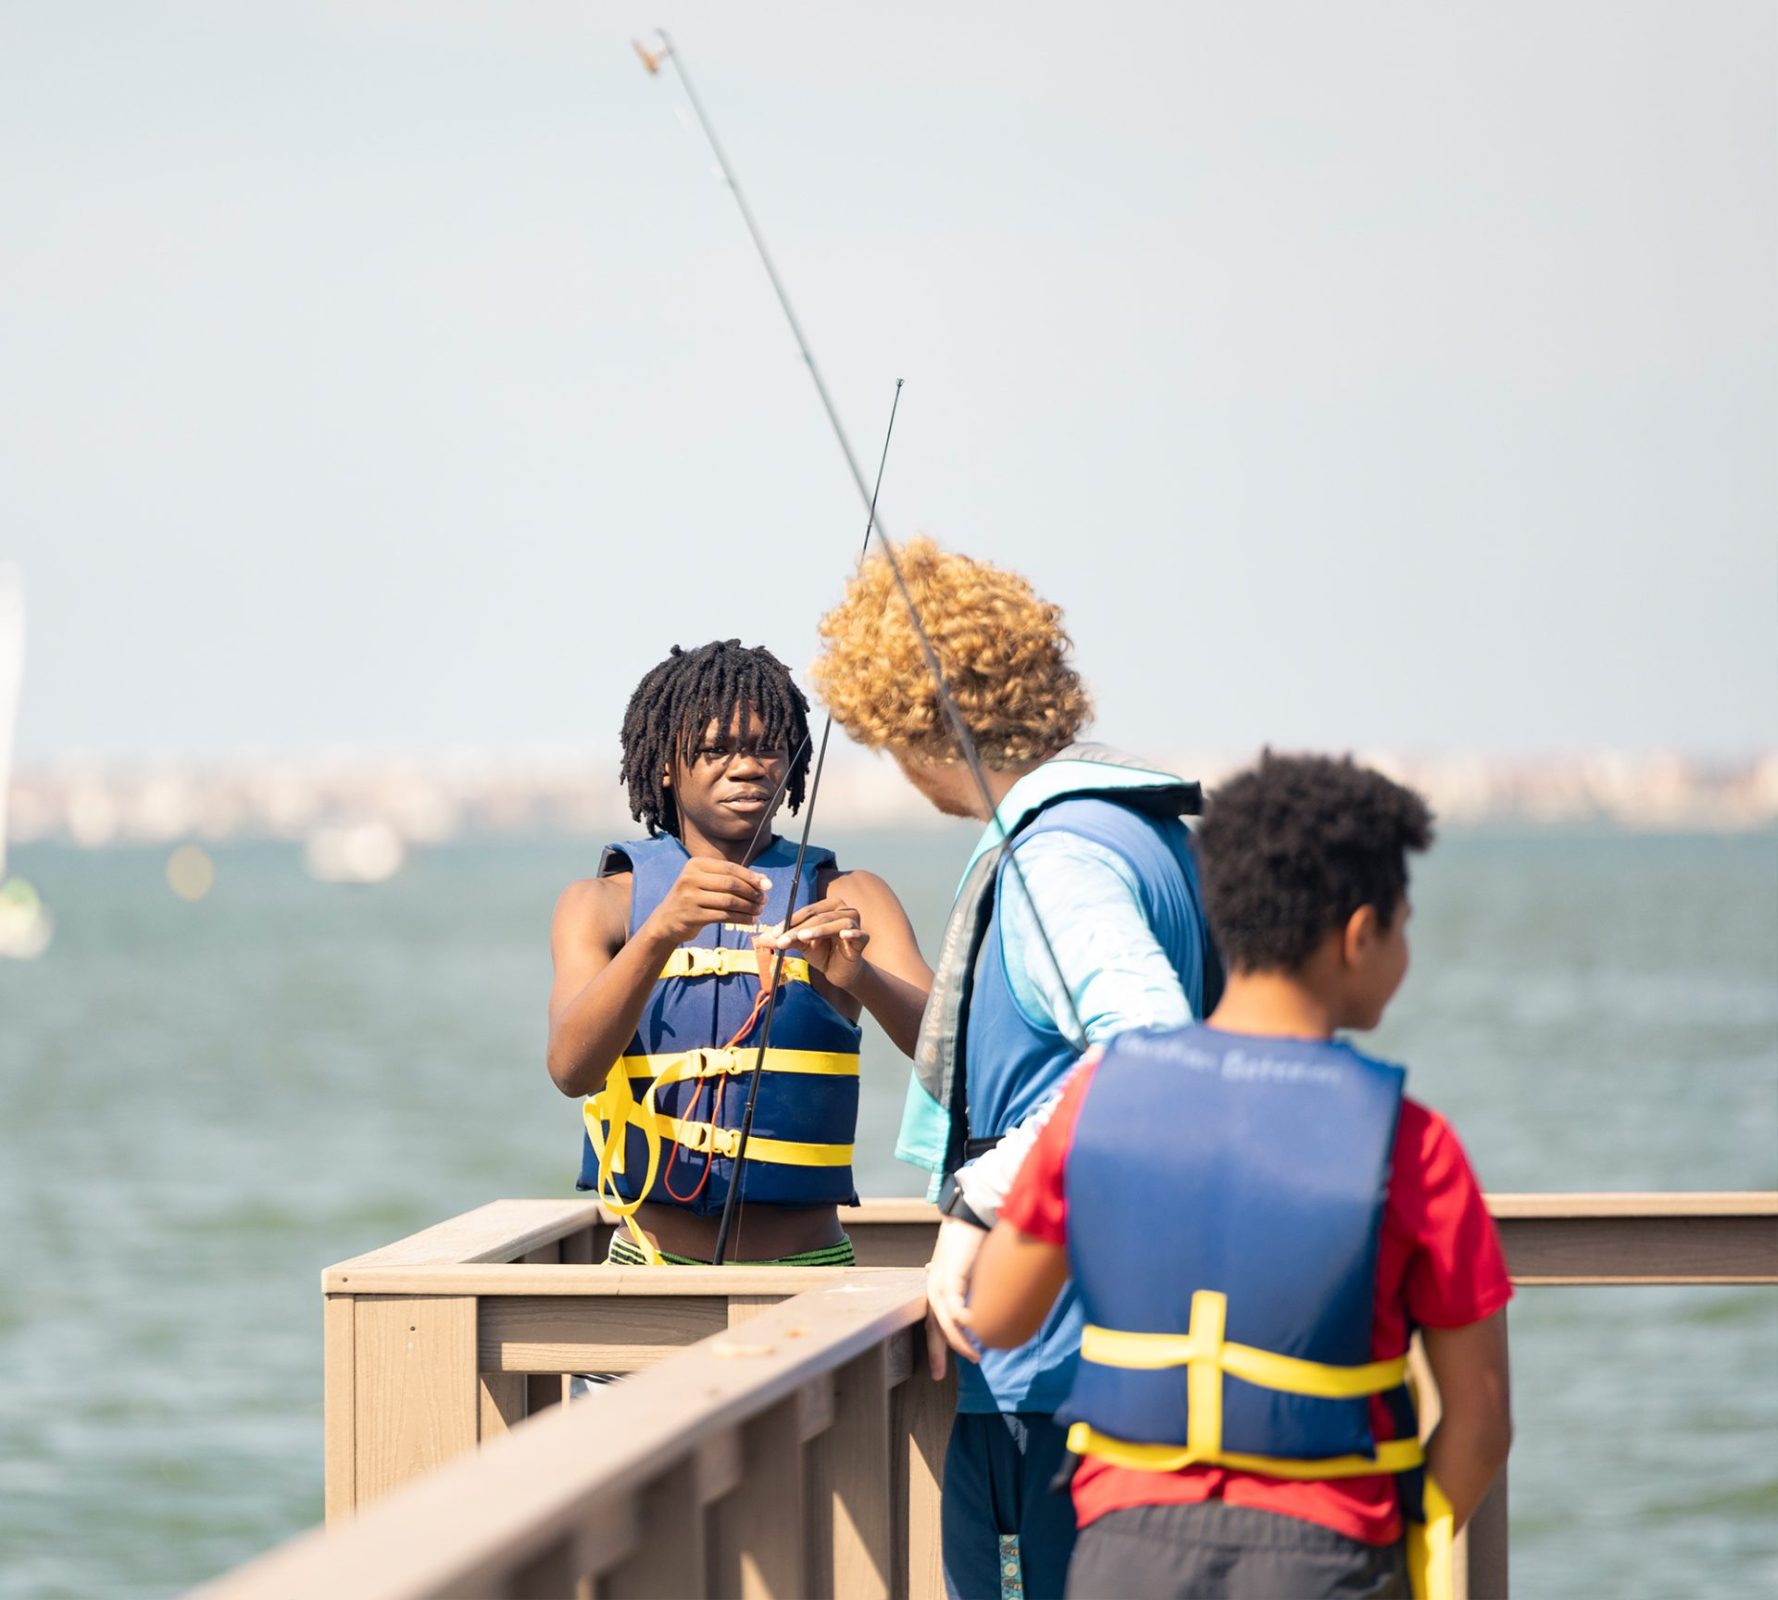 Two children wearing life vests cast fishing lines at the Eckerd College pier as an instructor observes.